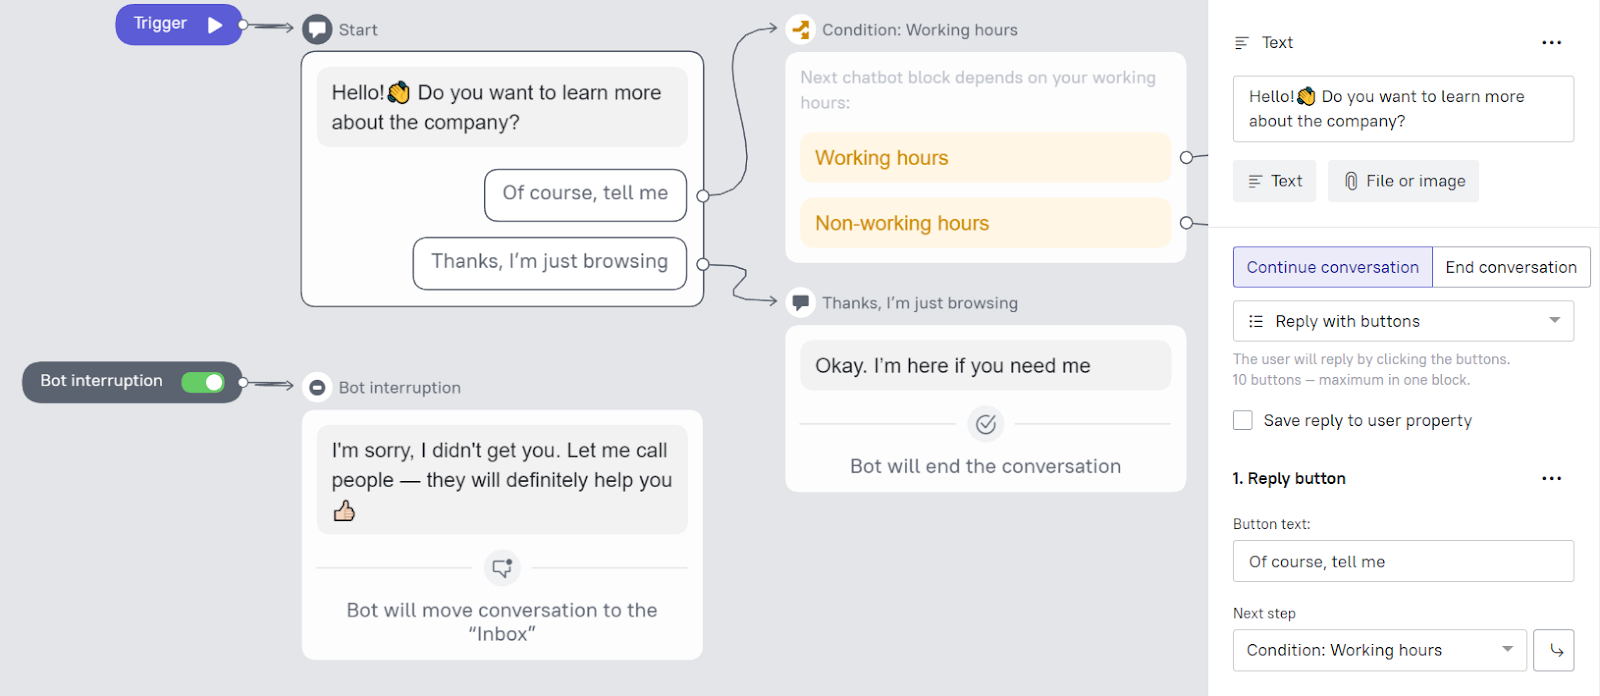 dashly chatbot builder as a part of lead generation services